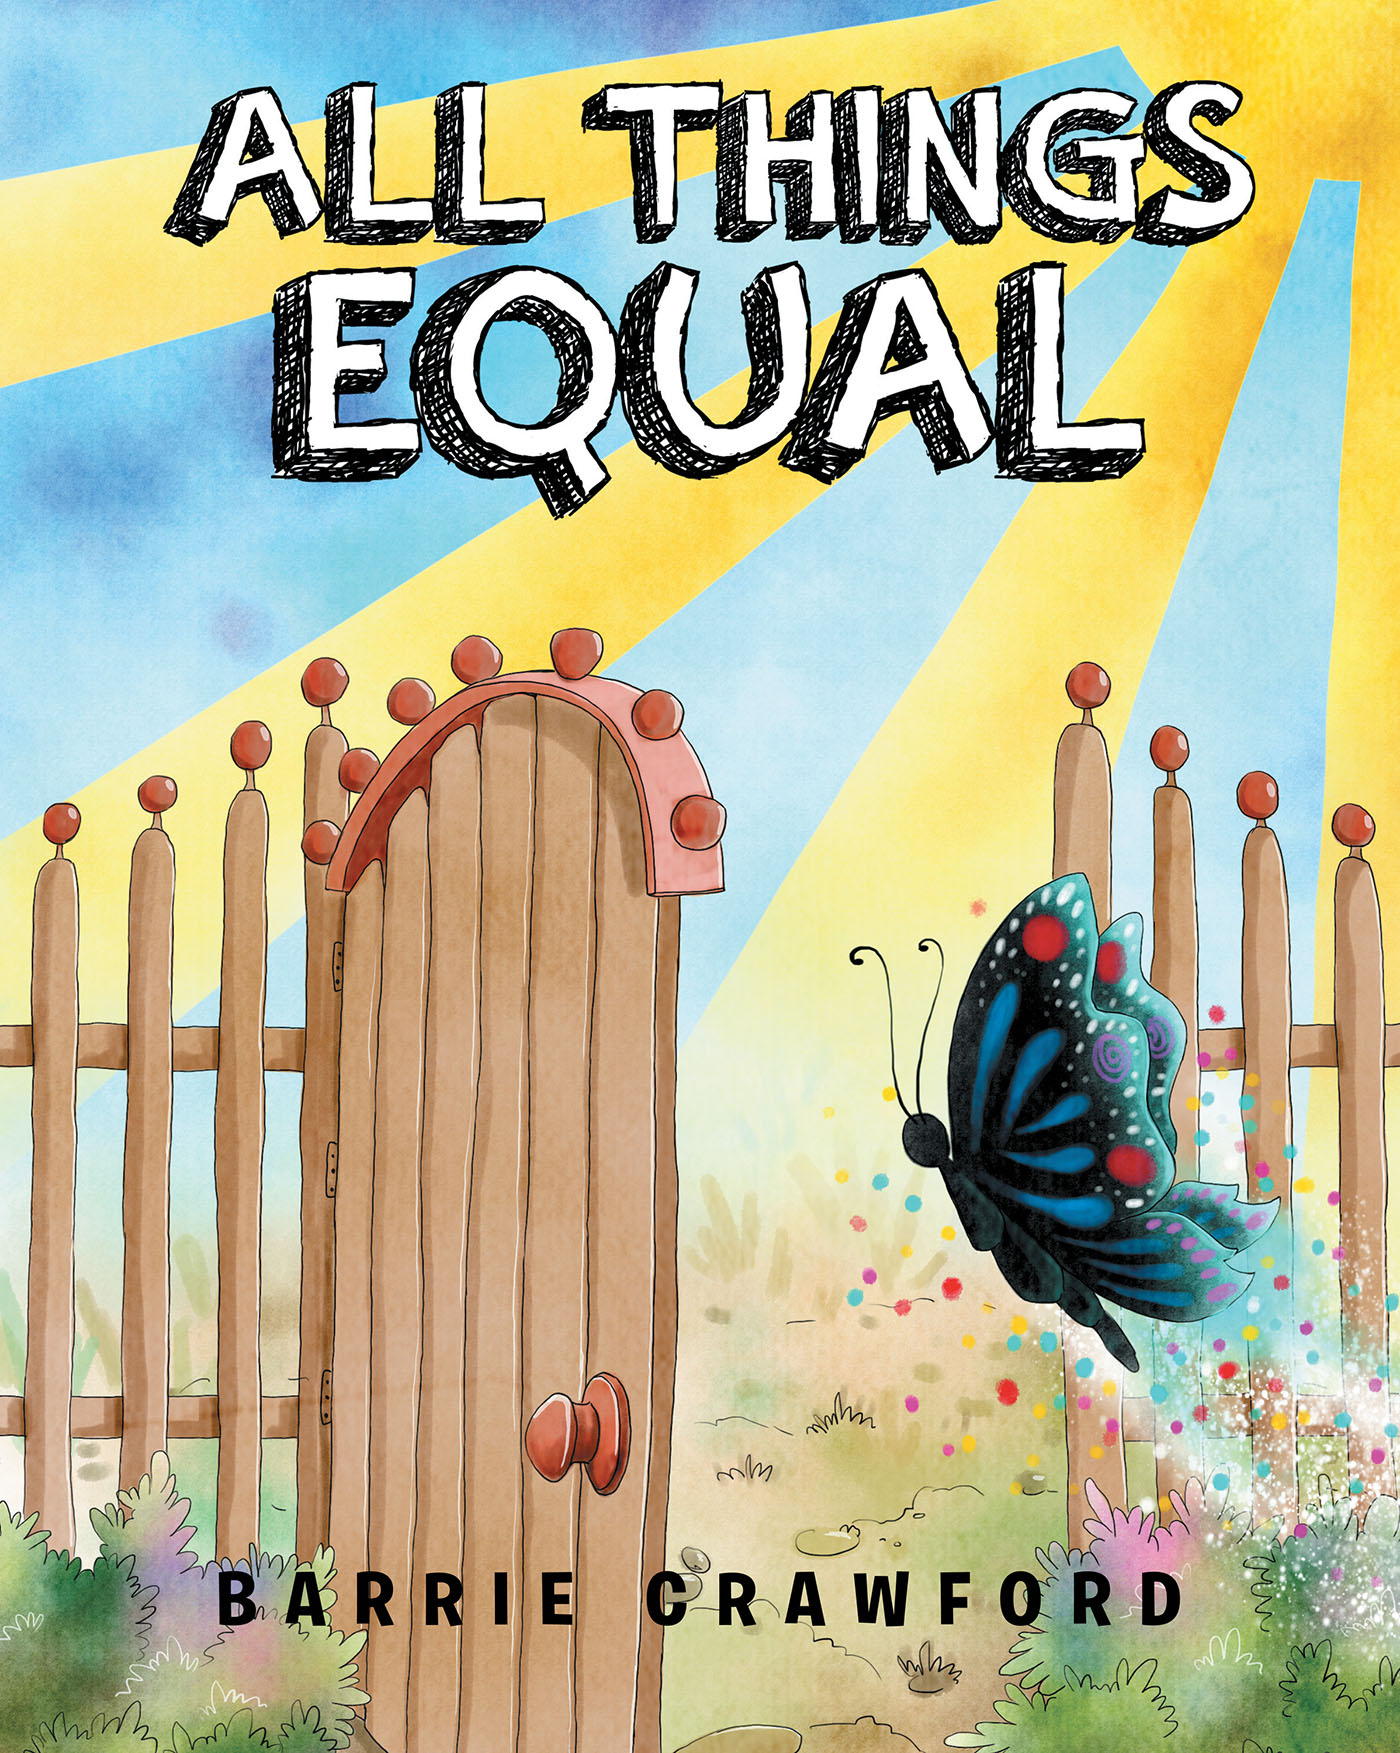 Author Barrie Crawford’s New Book, "All Things Equal," is a Simple, Impactful Story About Two School-Aged Children Who Learn a Valuable Lesson About How to Treat Others